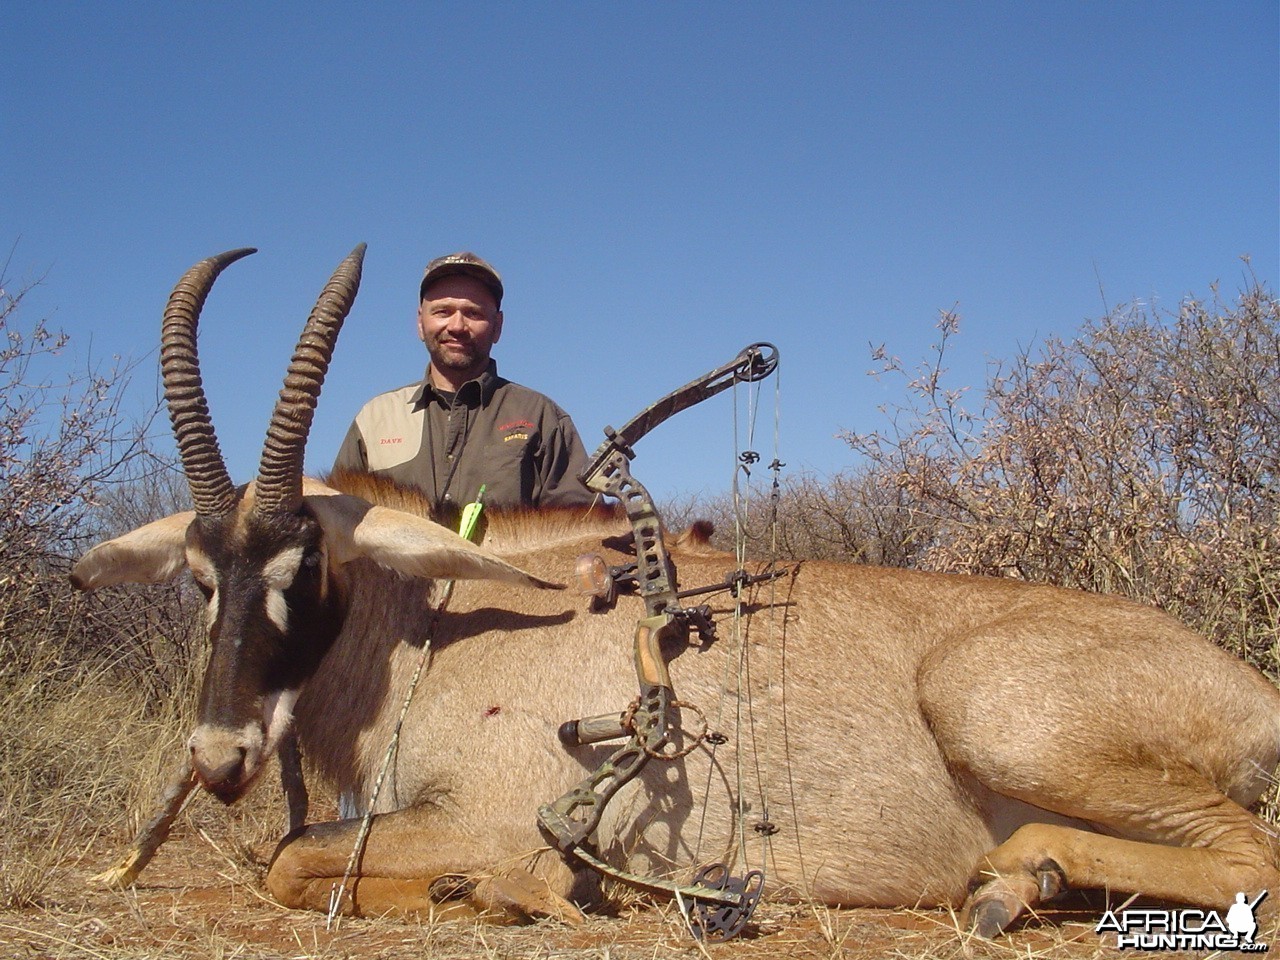 Roan with bow, taken with Warthog Safaris